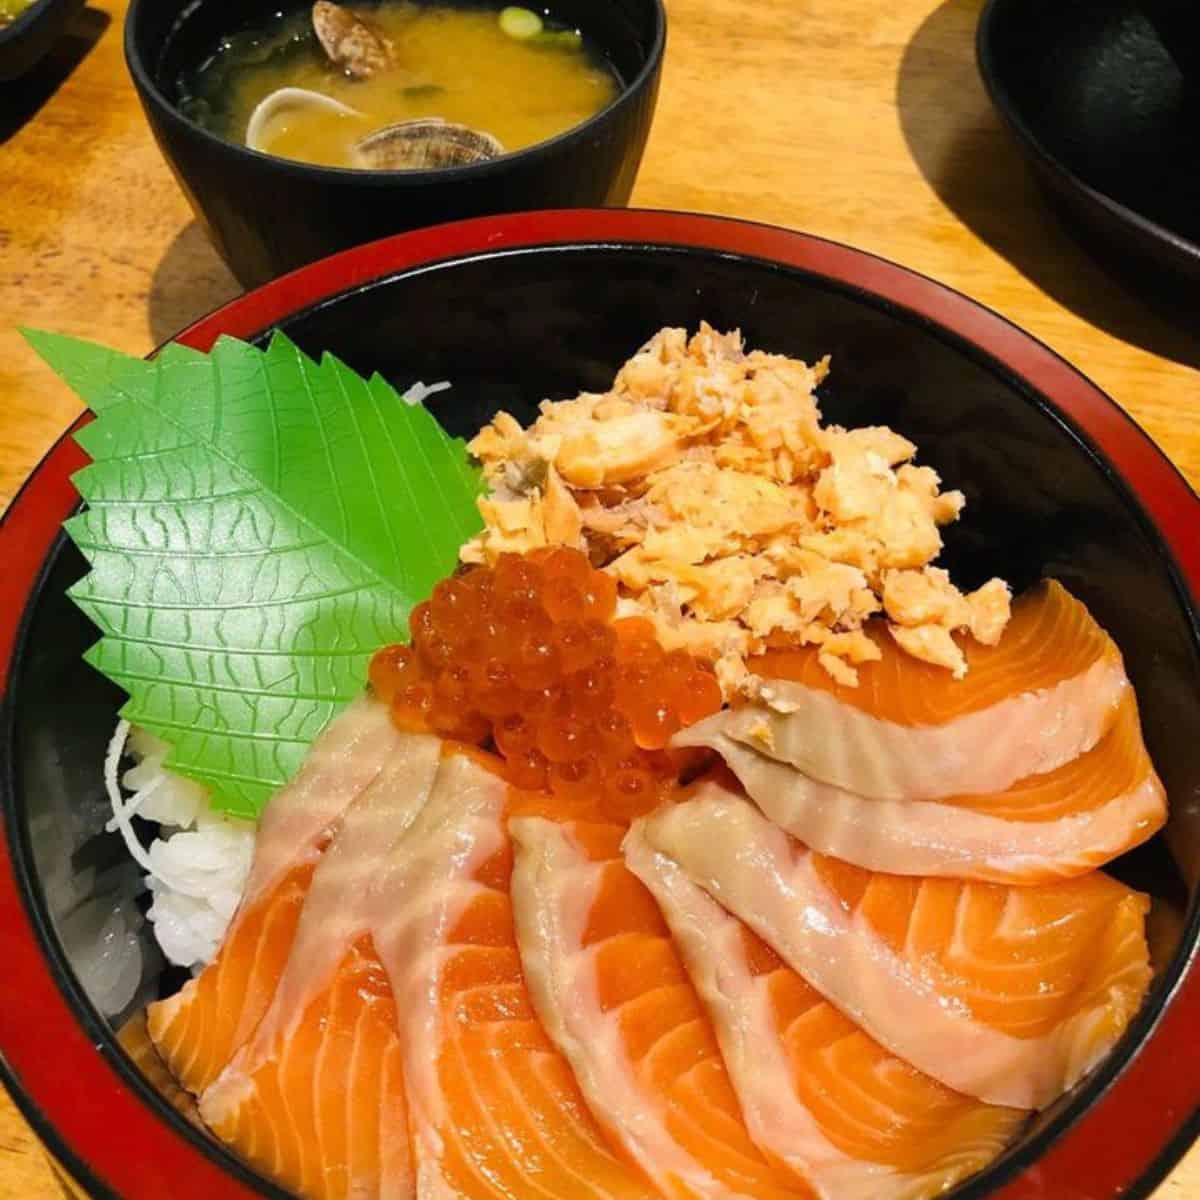 Salmon Oyakodon with fresh slices of salmon and other condiments